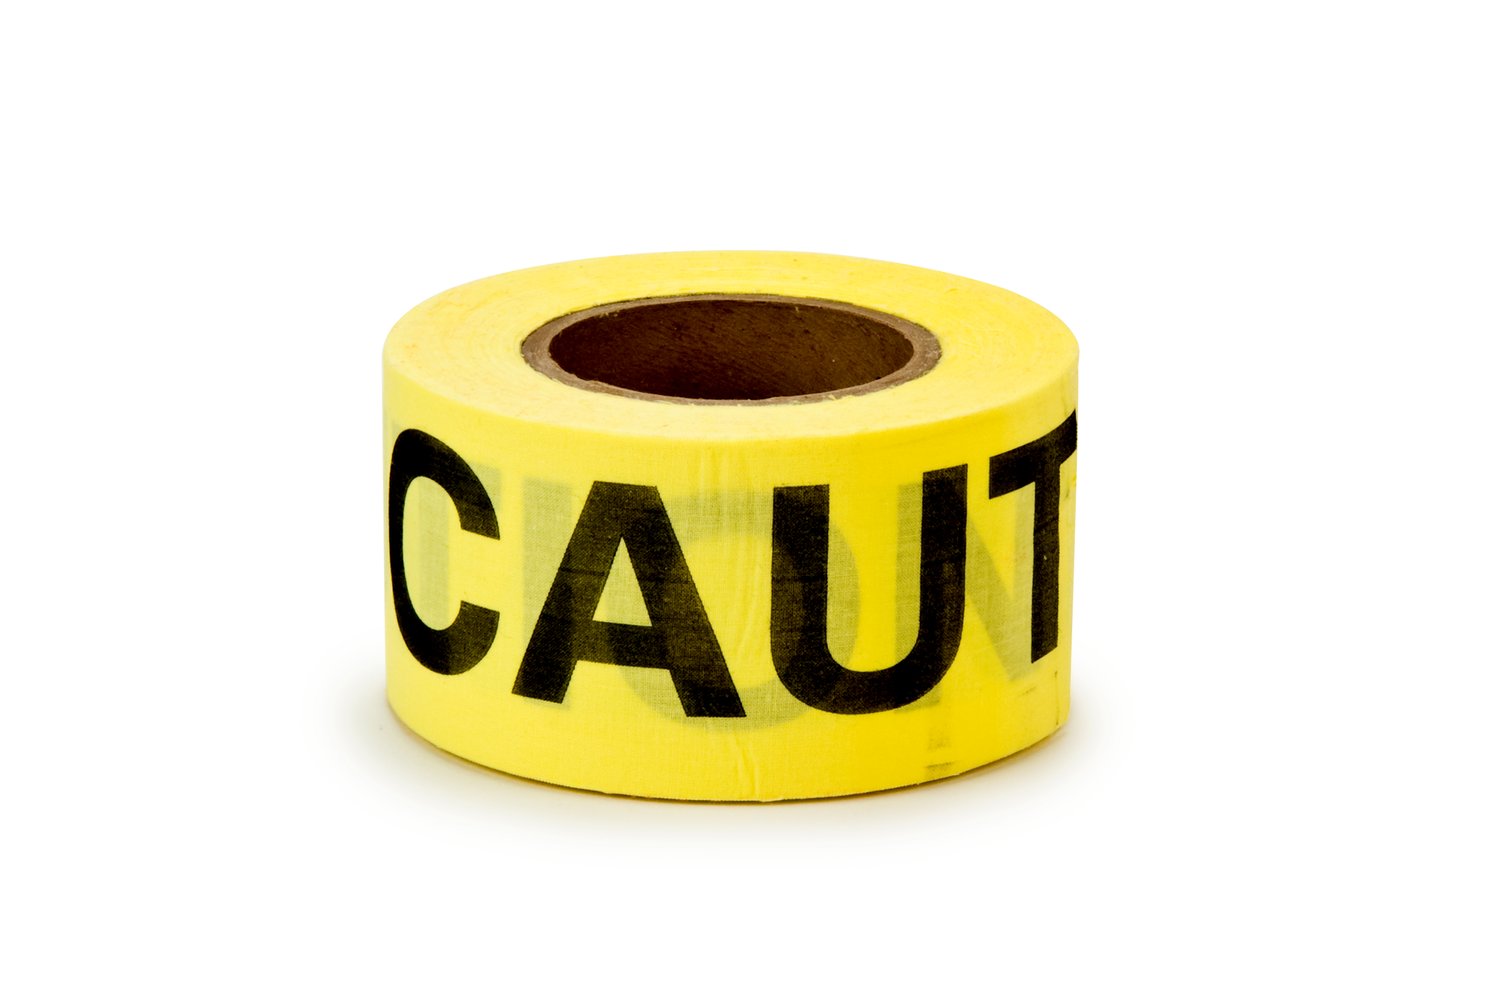 7000133197 - Scotch Repulpable Barricade Tape 516, CAUTION, 3 in x 150 ft, Yellow, 8
rolls/Case